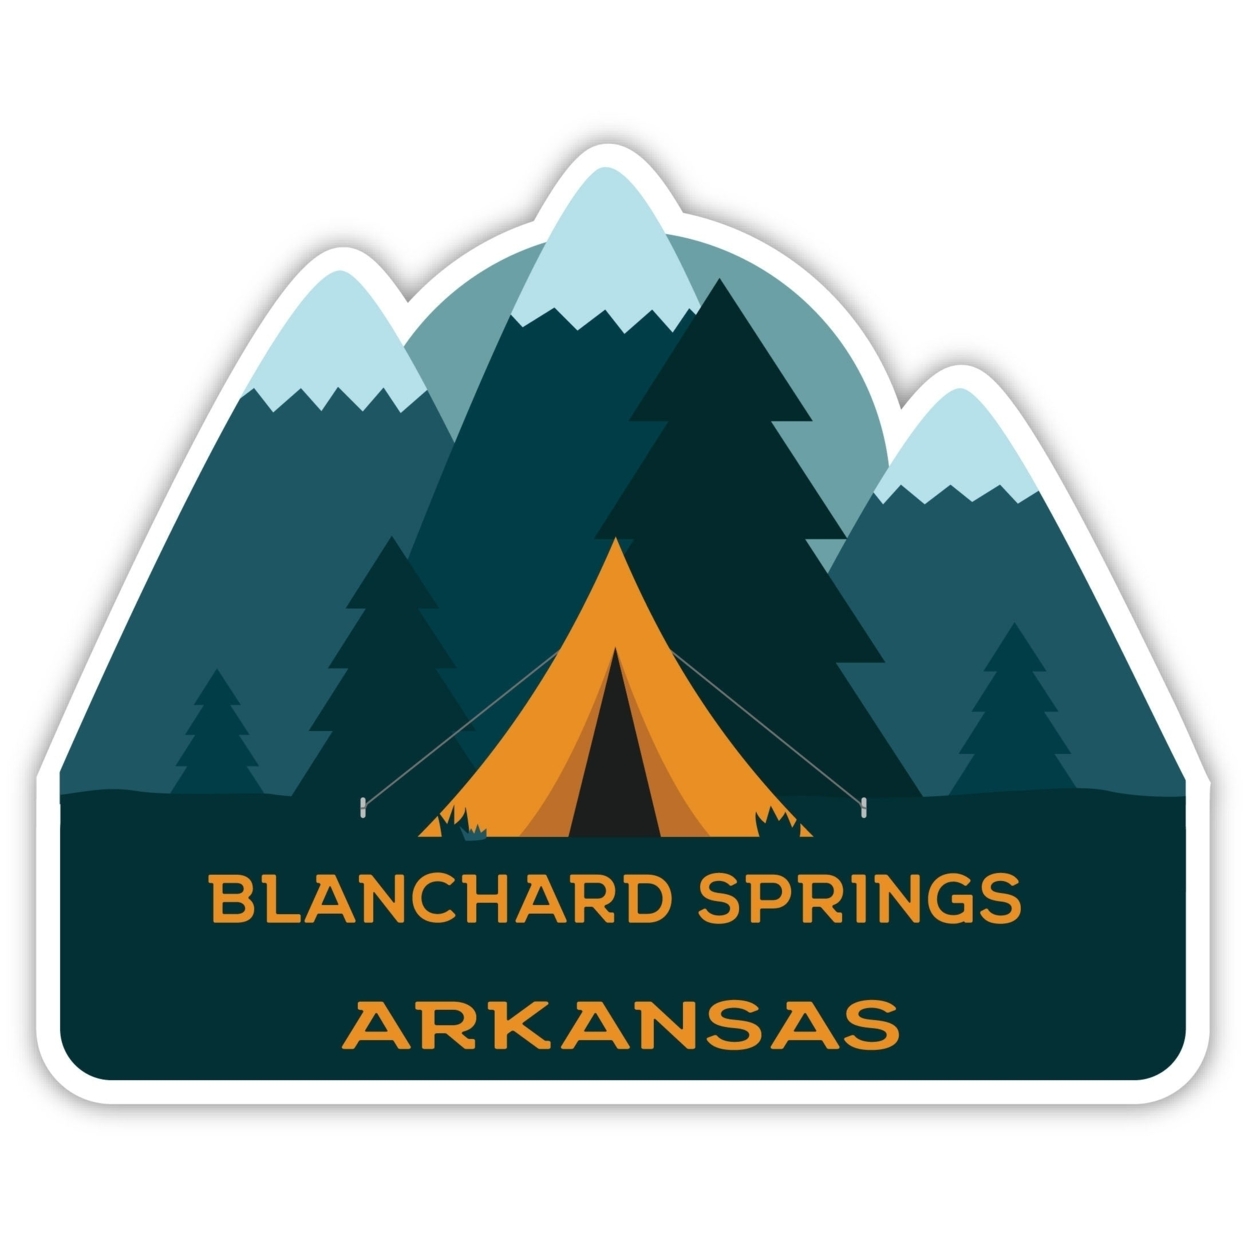 Blanchard Springs Arkansas Souvenir Decorative Stickers (Choose Theme And Size) - 4-Pack, 12-Inch, Tent